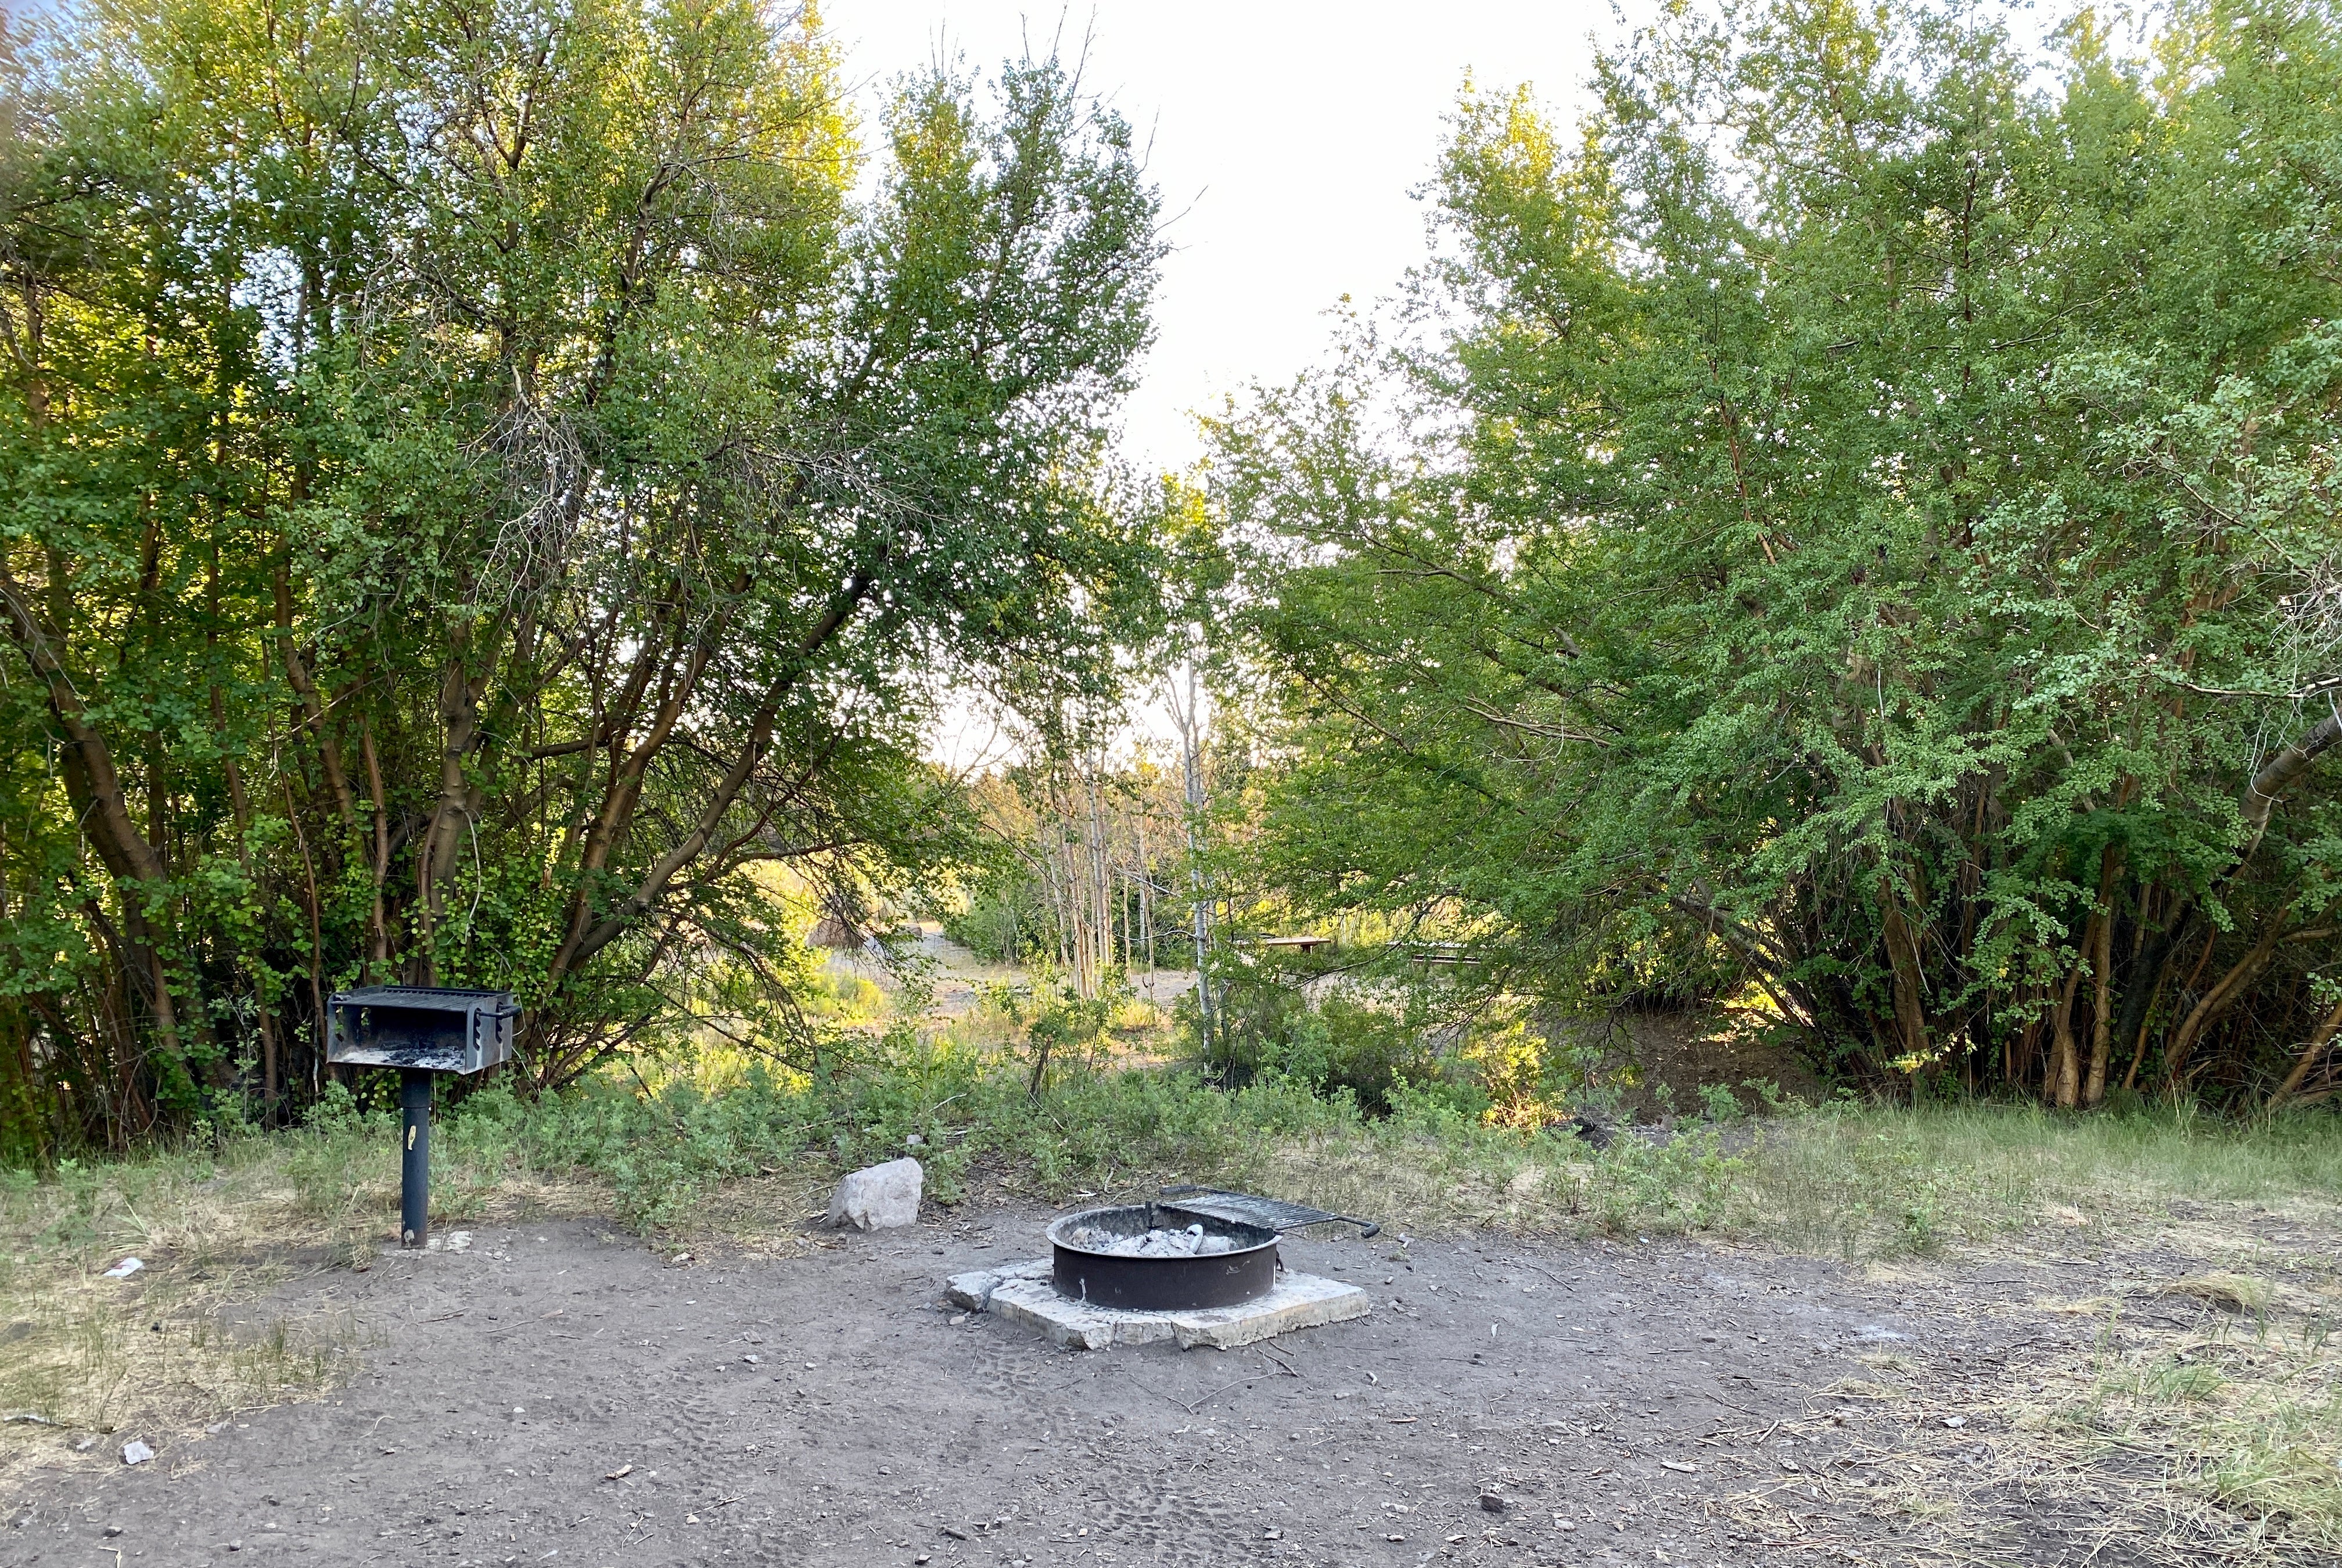 Camper submitted image from Pine Creek Campground - 5